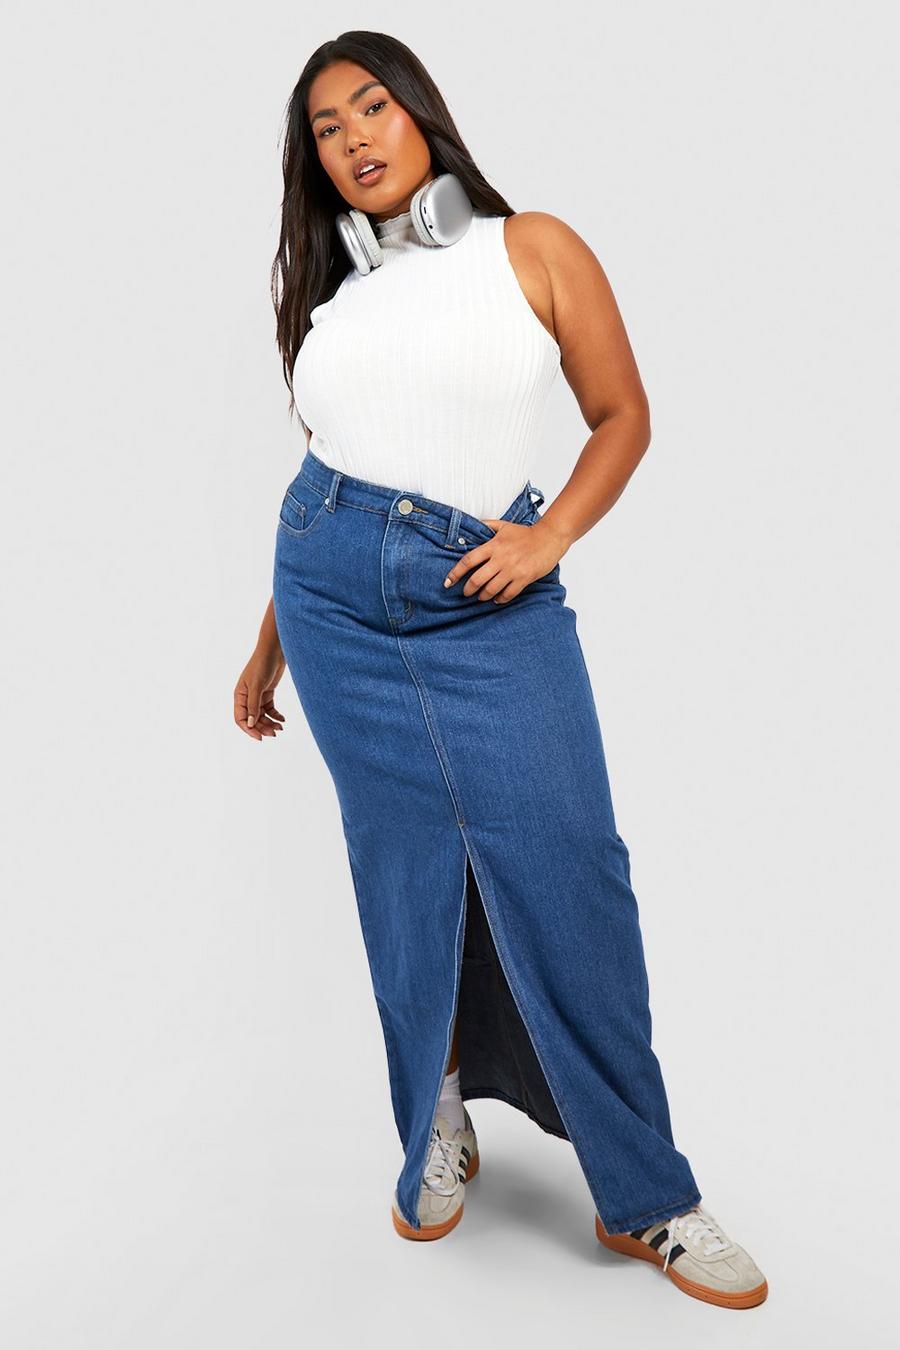 Gonna maxi Plus Size in denim con spacco frontale, Mid blue